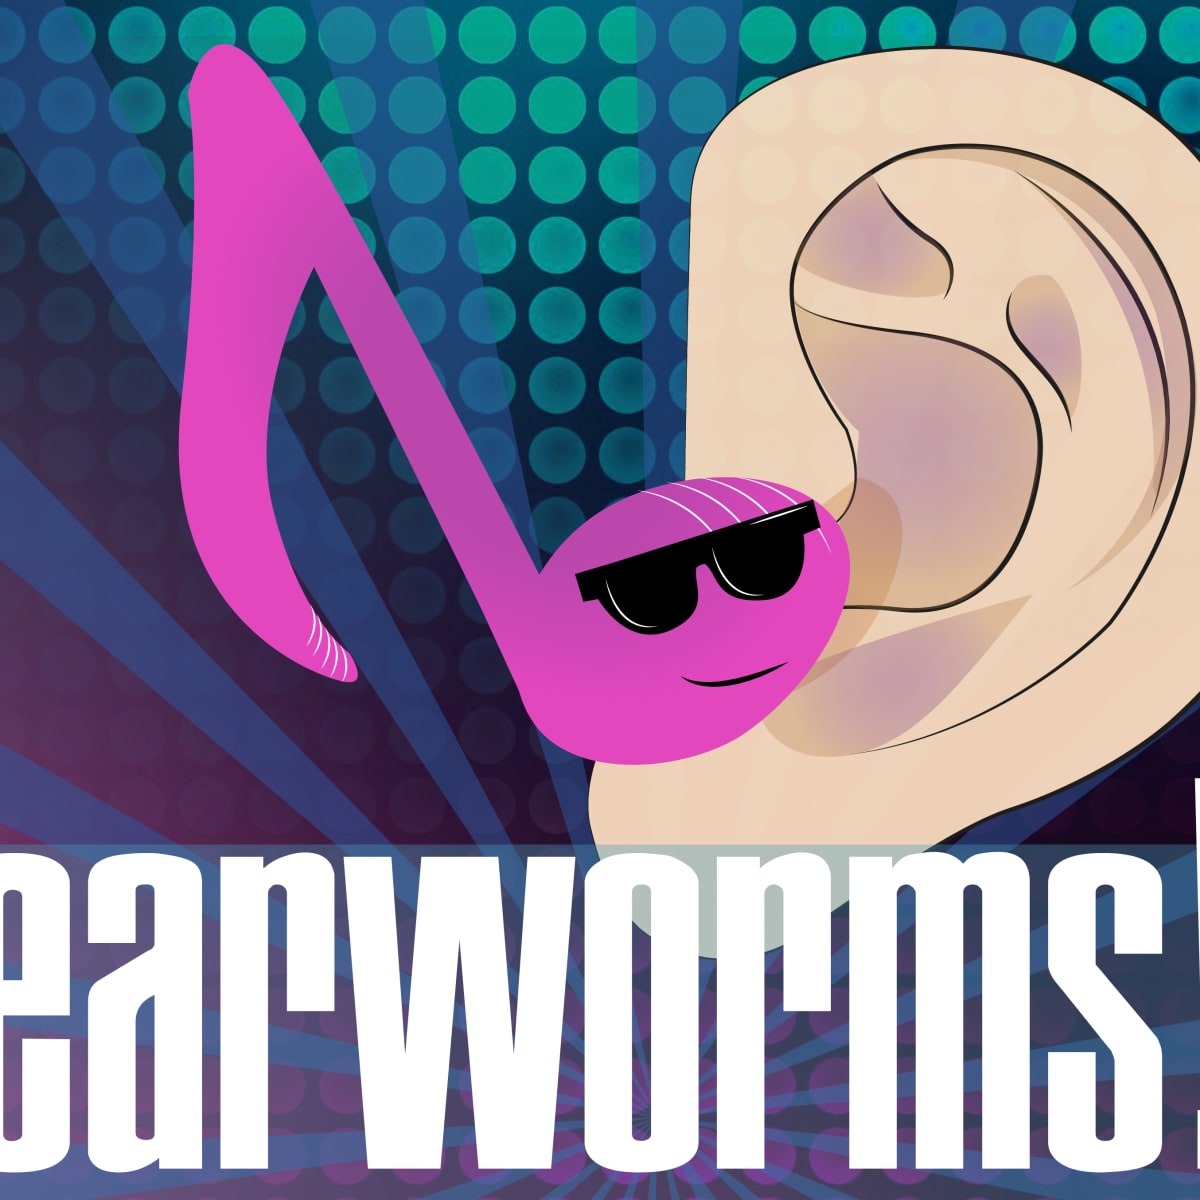 Top Ten Earworms Songs That Get Stuck In Your Head Spinditty Music